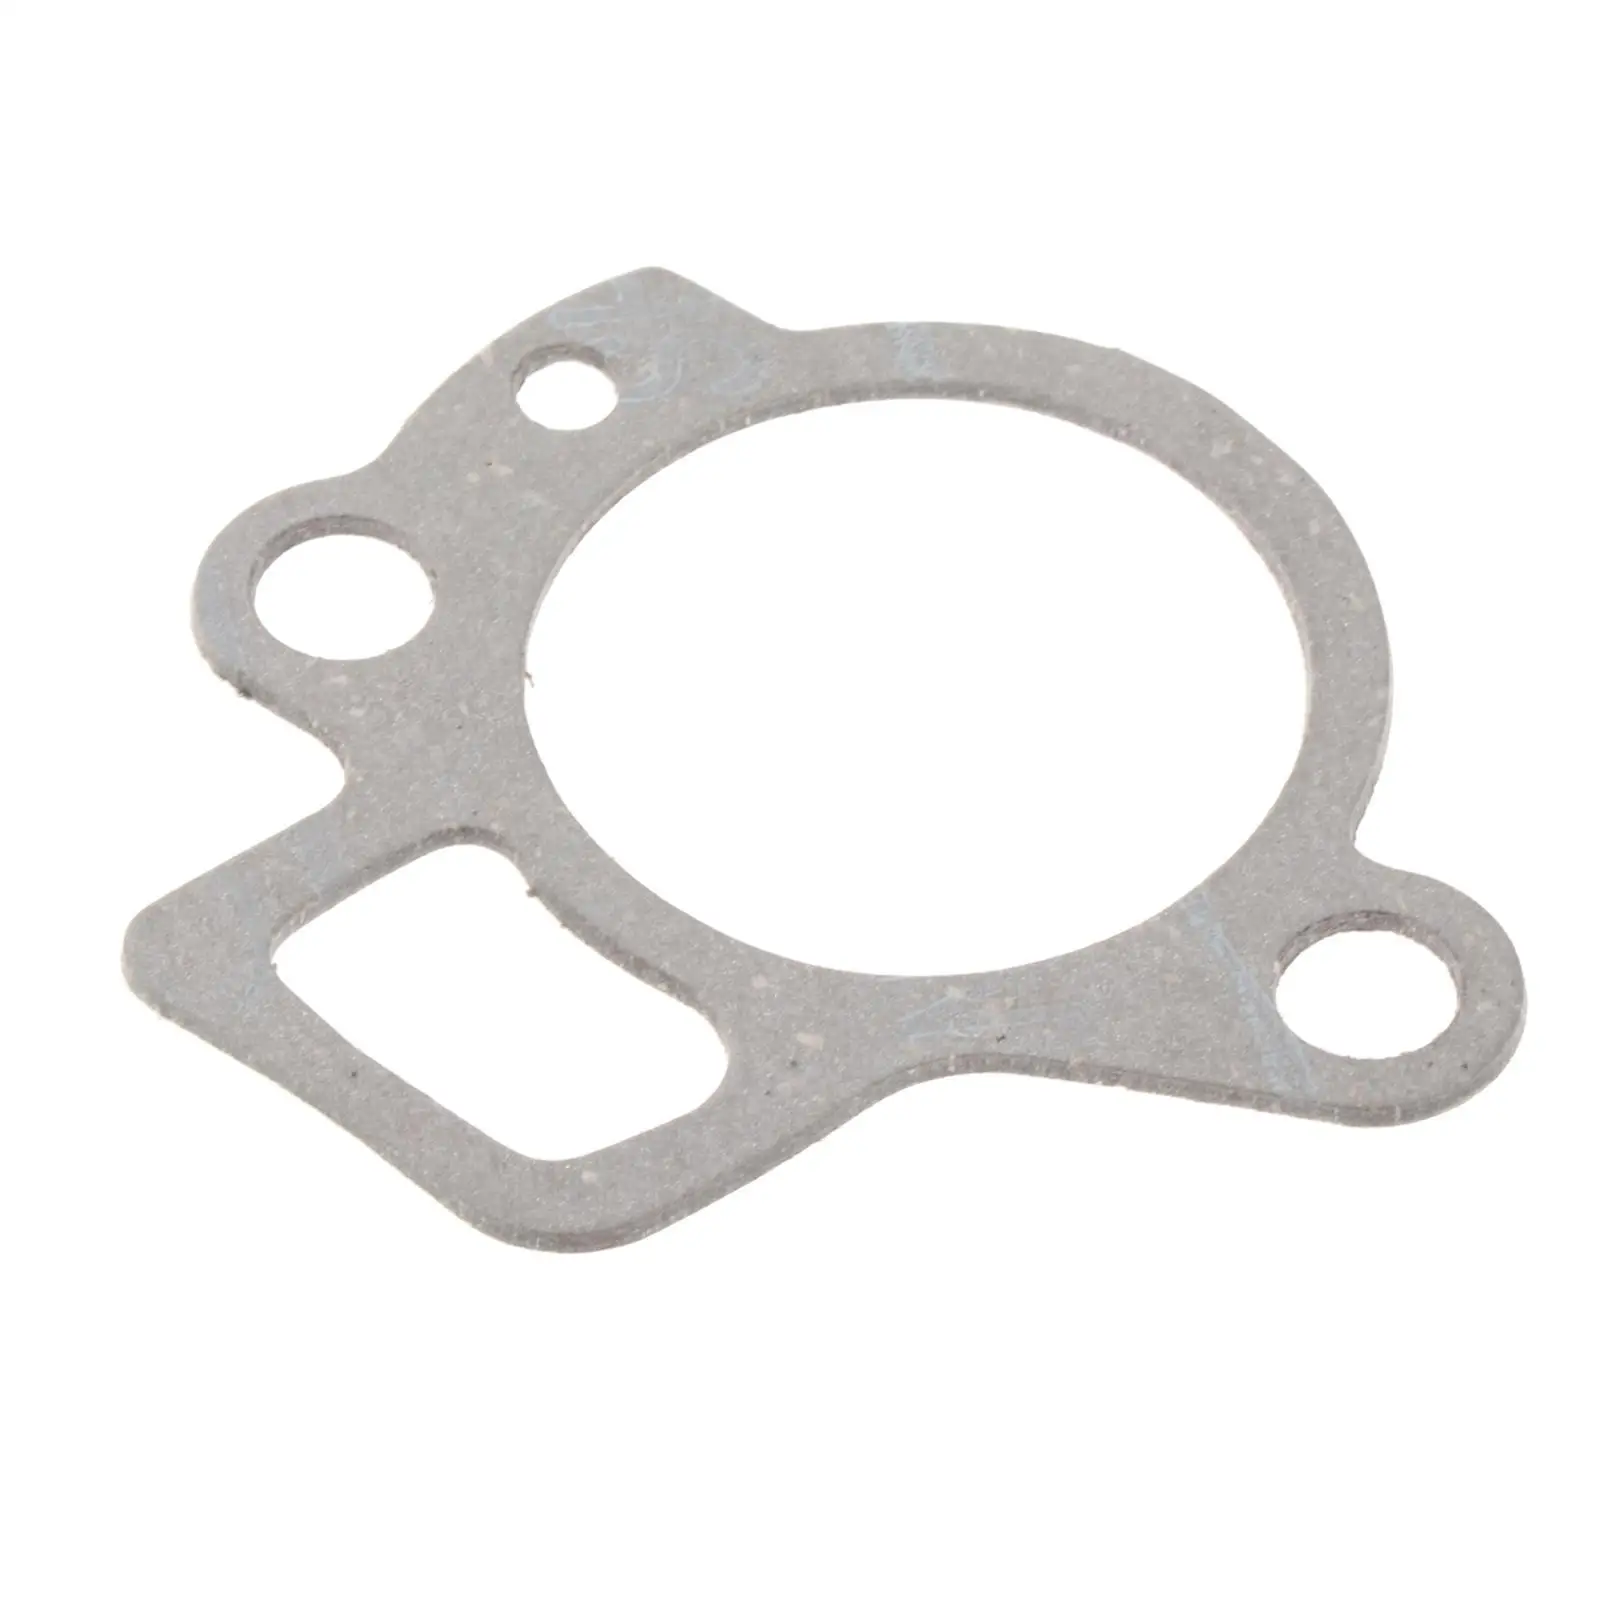 541-25 Thermostat Gasket Fit for Yamaha Outboard Engine Spare Parts High Reliability